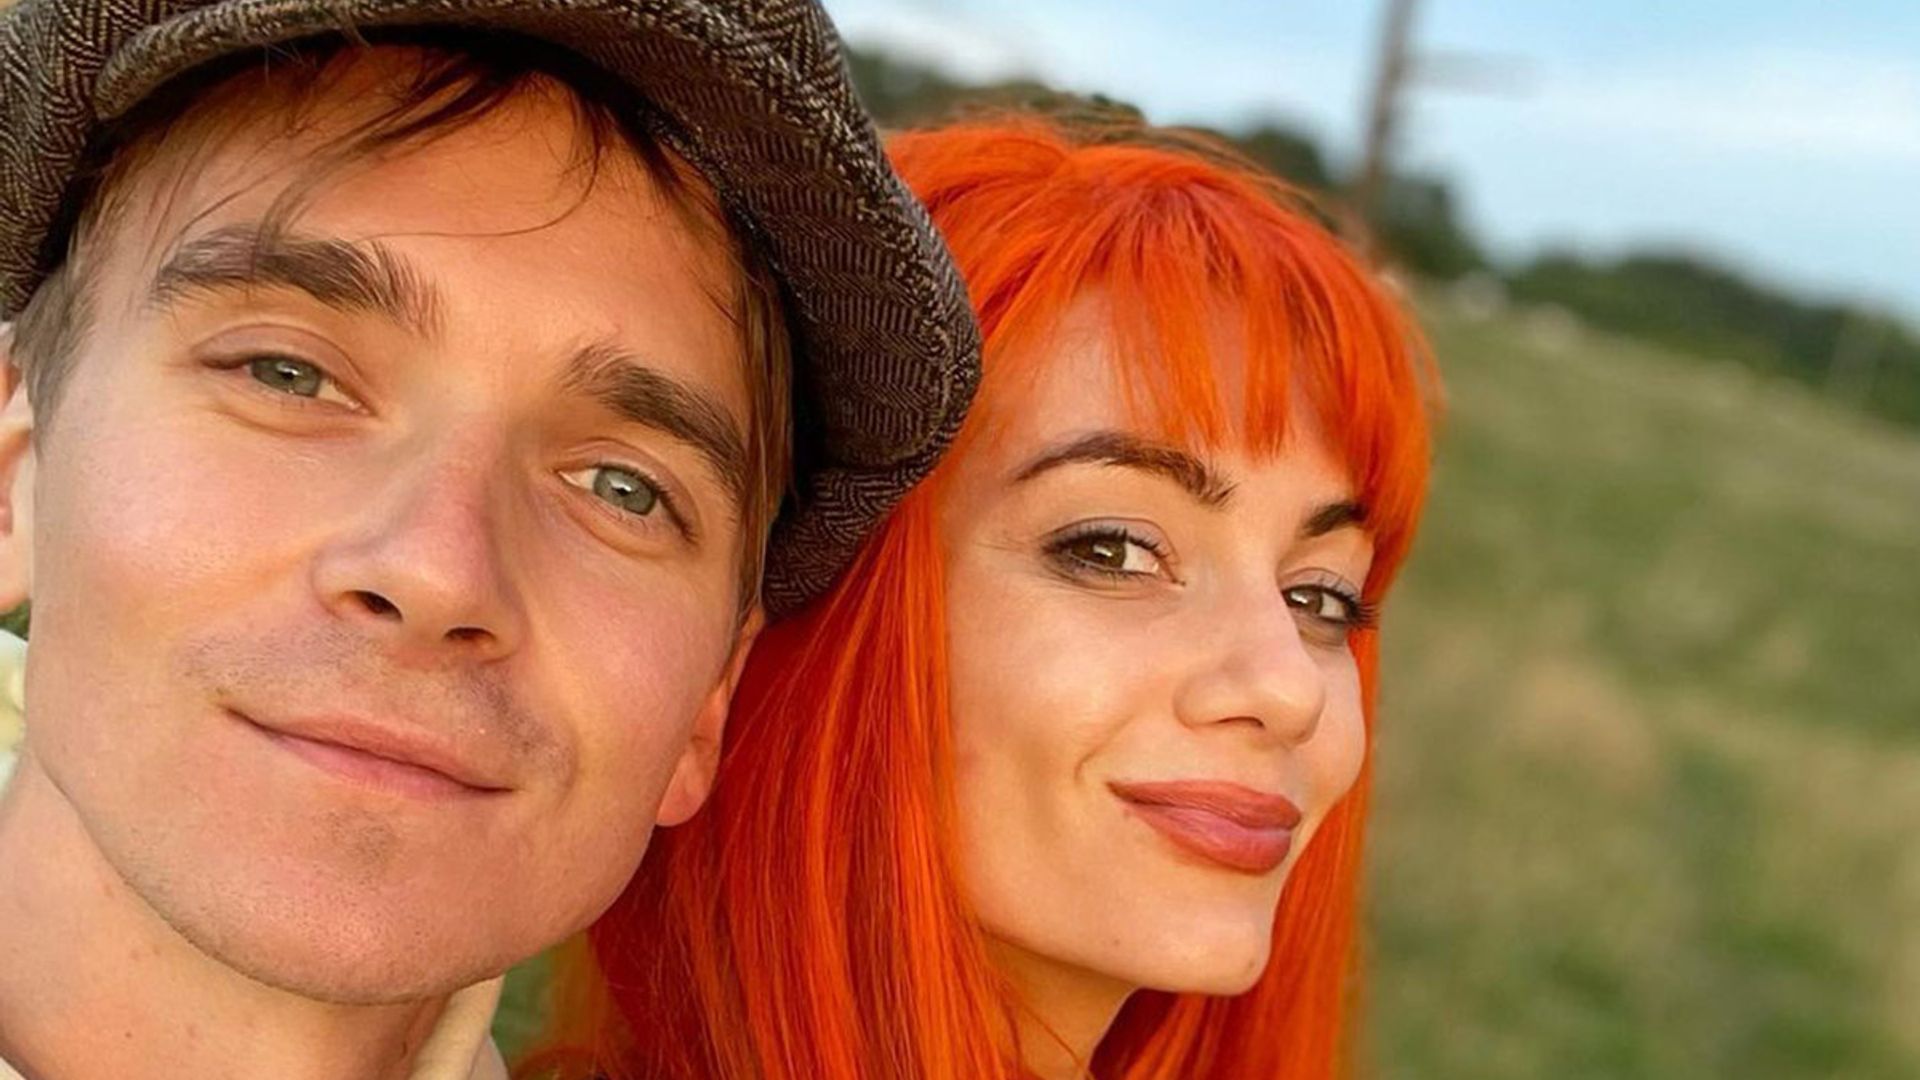 Joe Sugg shares heartwarming baby update – see the photos and Dianne Buswell's reaction